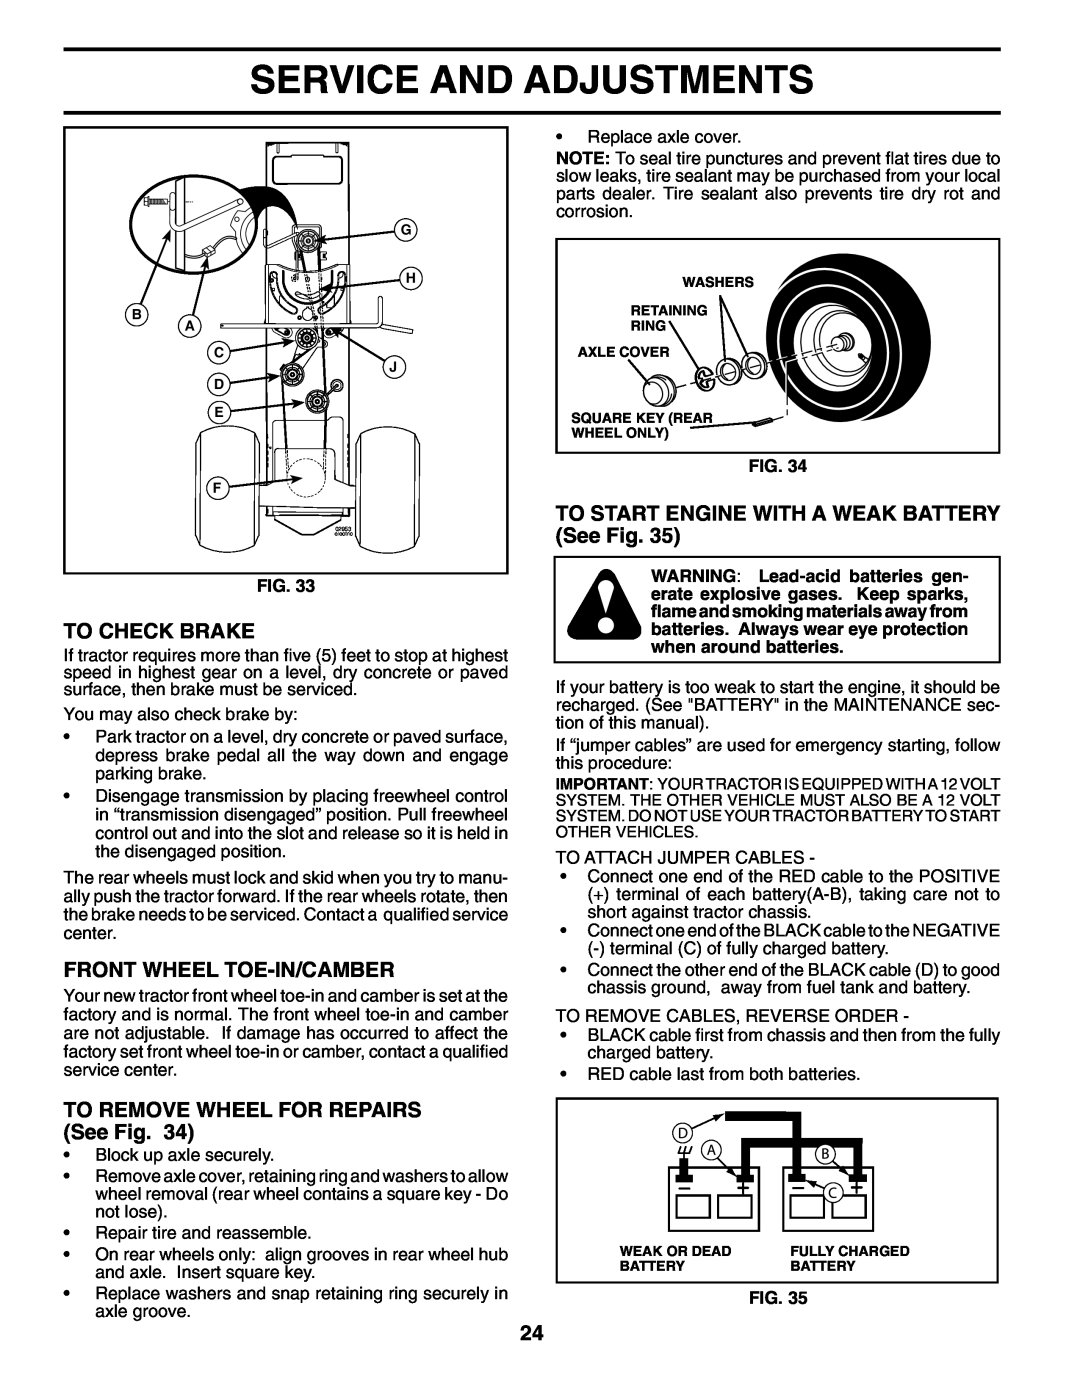 Husqvarna YTH2754XP owner manual Front Wheel Toe-In/Camber, TO REMOVE WHEEL FOR REPAIRS See Fig, Service And Adjustments 